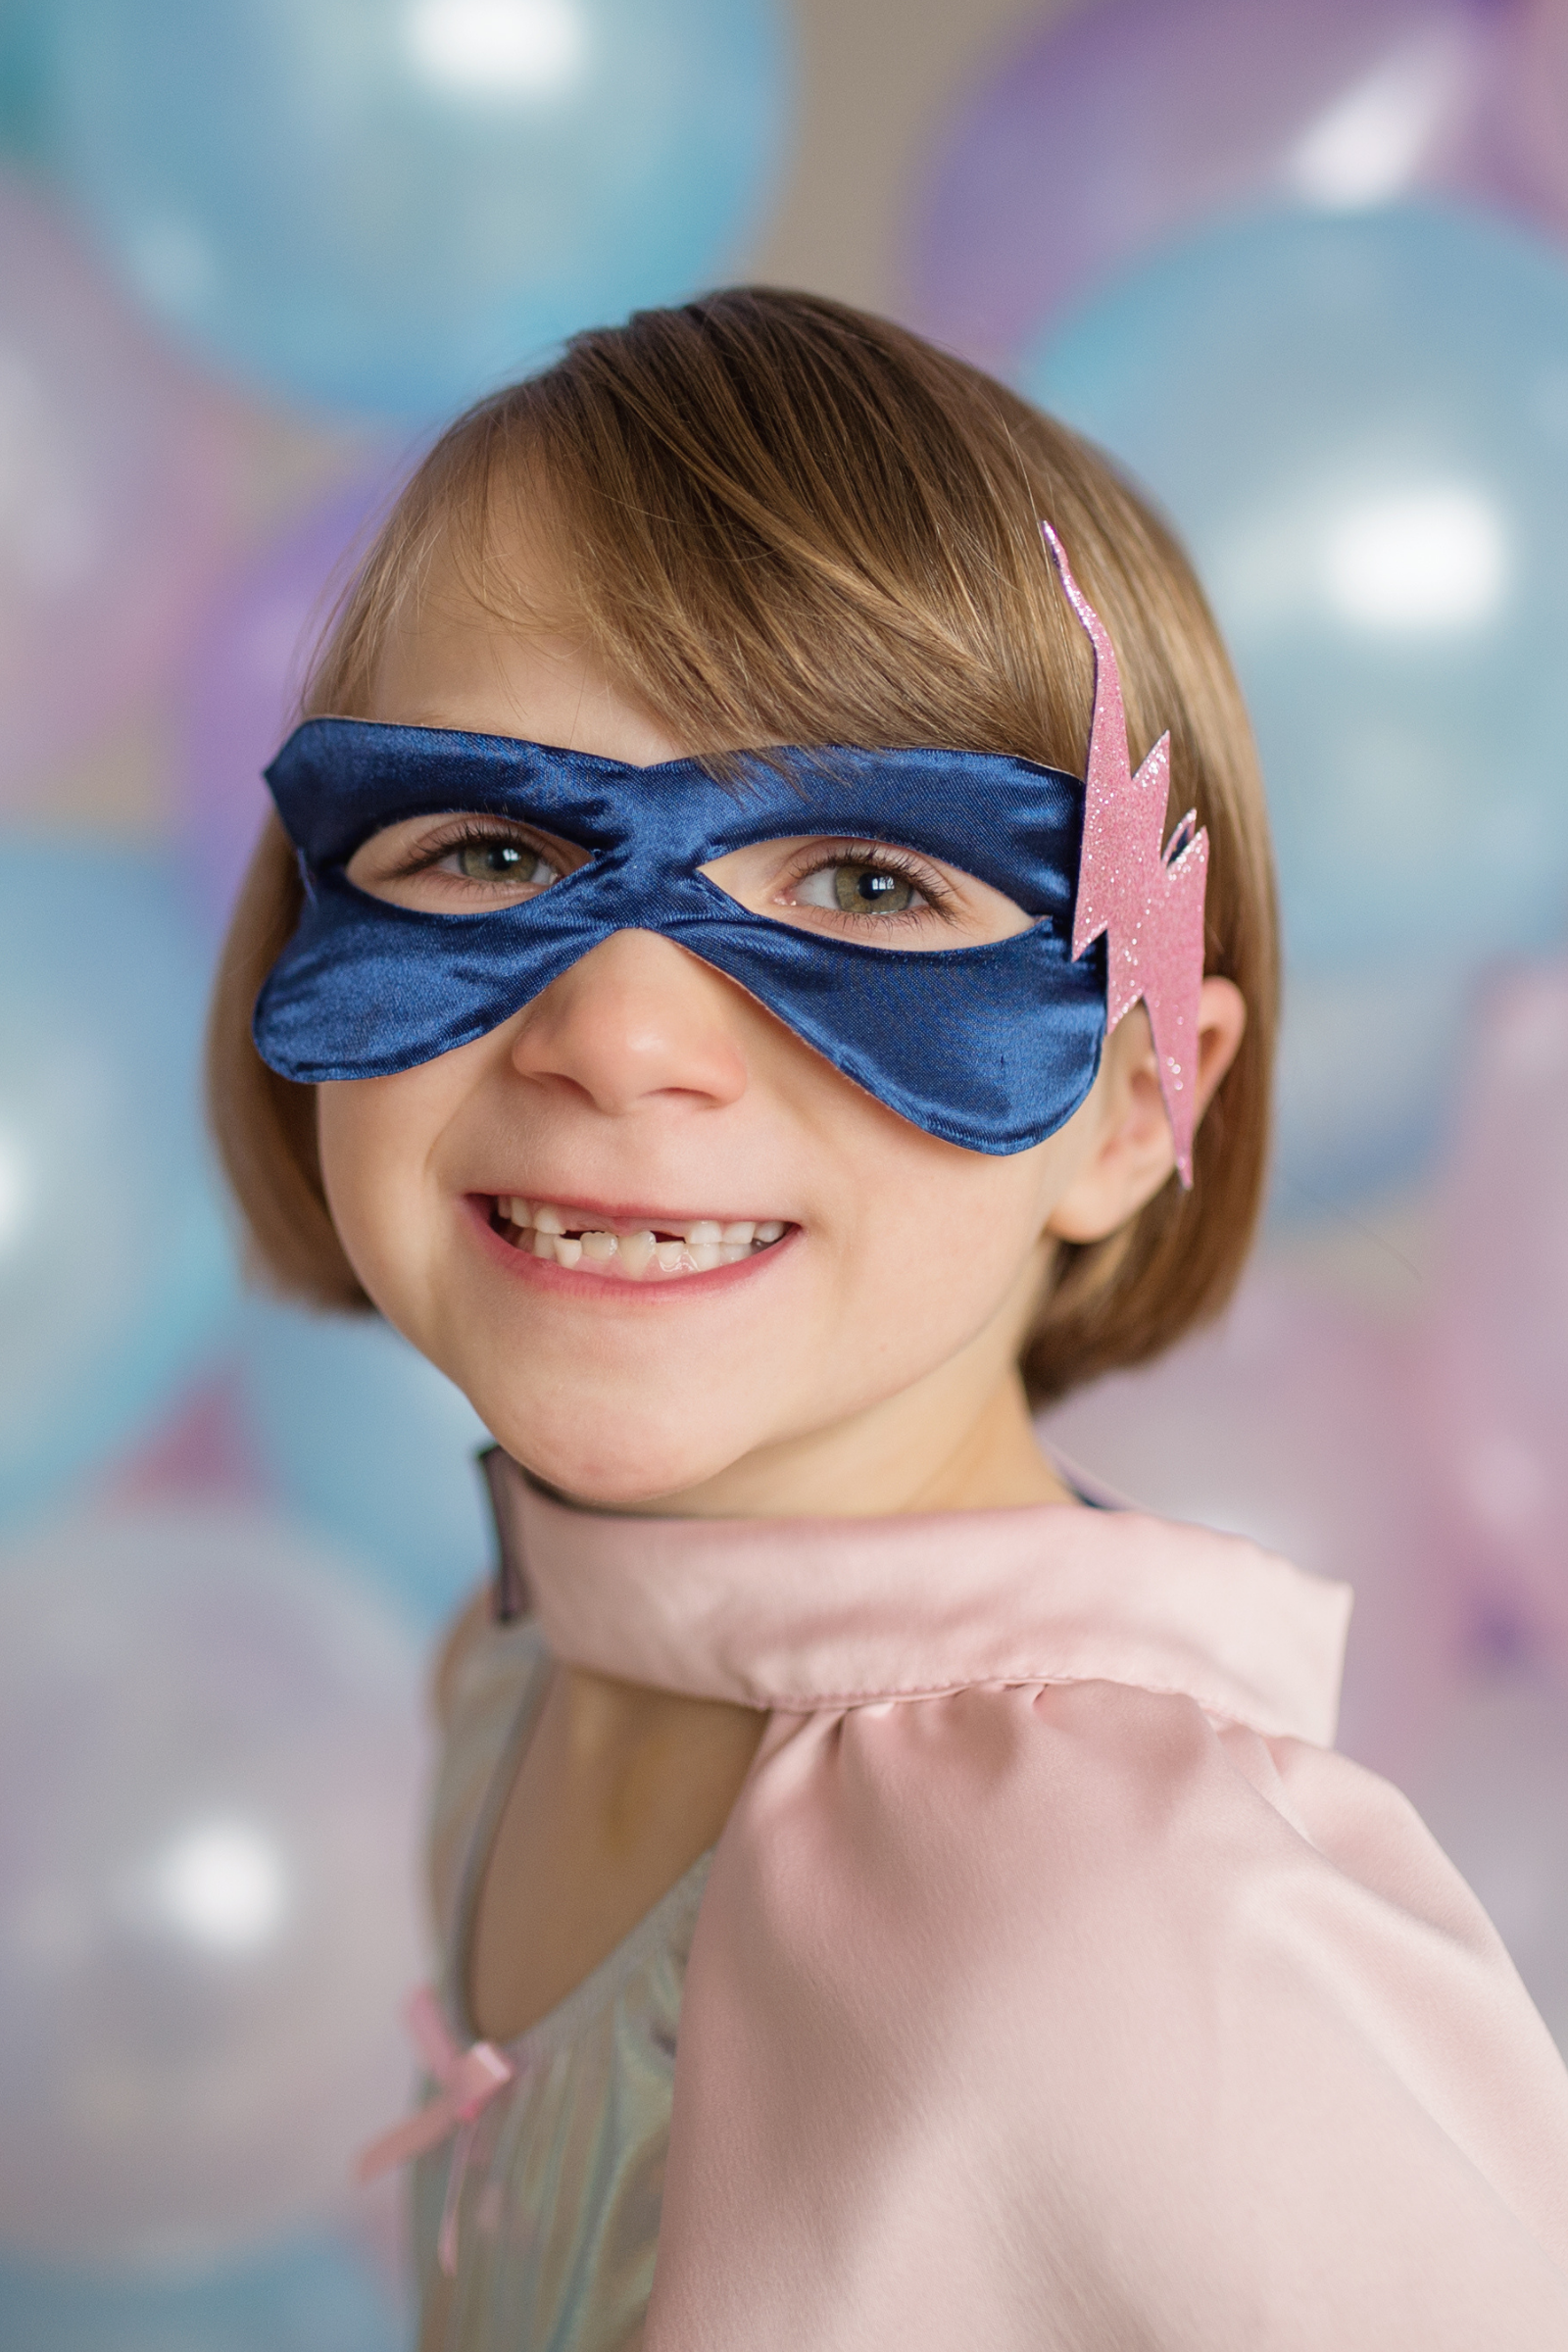 Great Pretenders Superhero Fancy Dress for Girls - Includes tutu, cape and  mask! girl